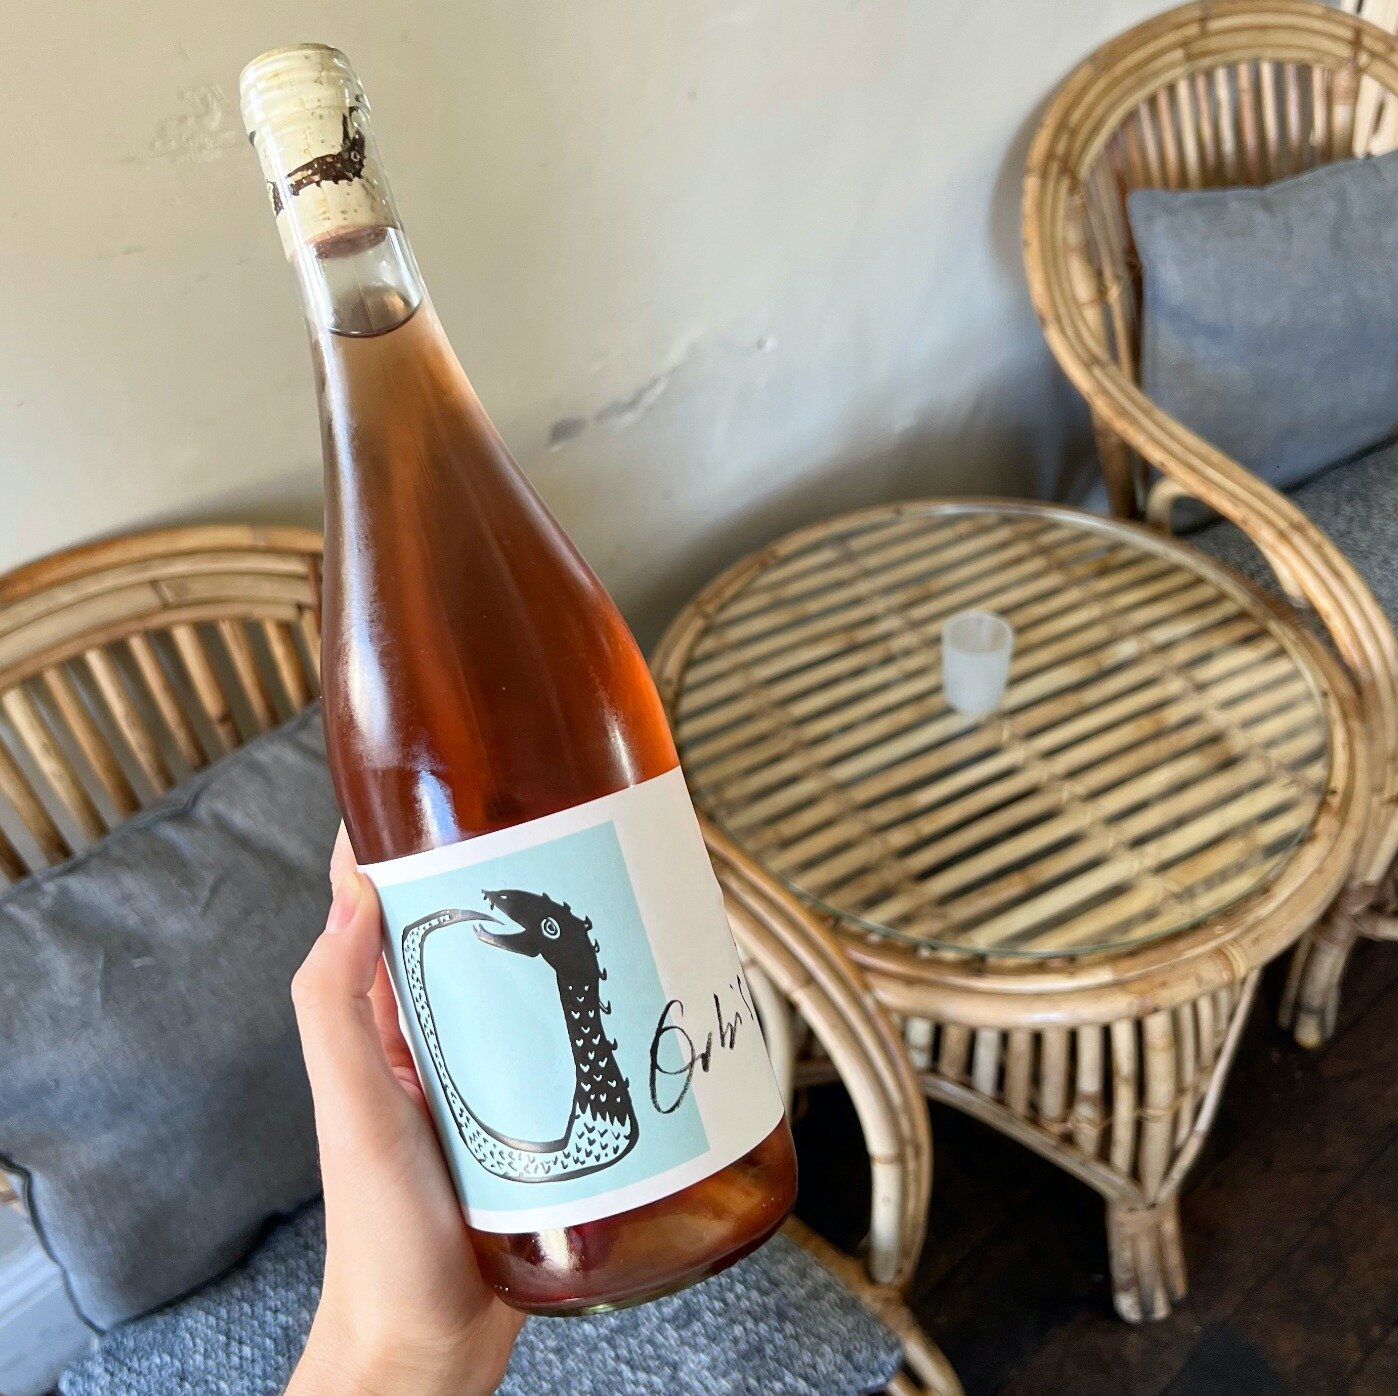 Staff pick for the week: 2021 Orbis. A Tempranillo Rose from South Aus, boasting juicy quince and lychee on the nose, and a savoury note on the palate. ⁠
⁠